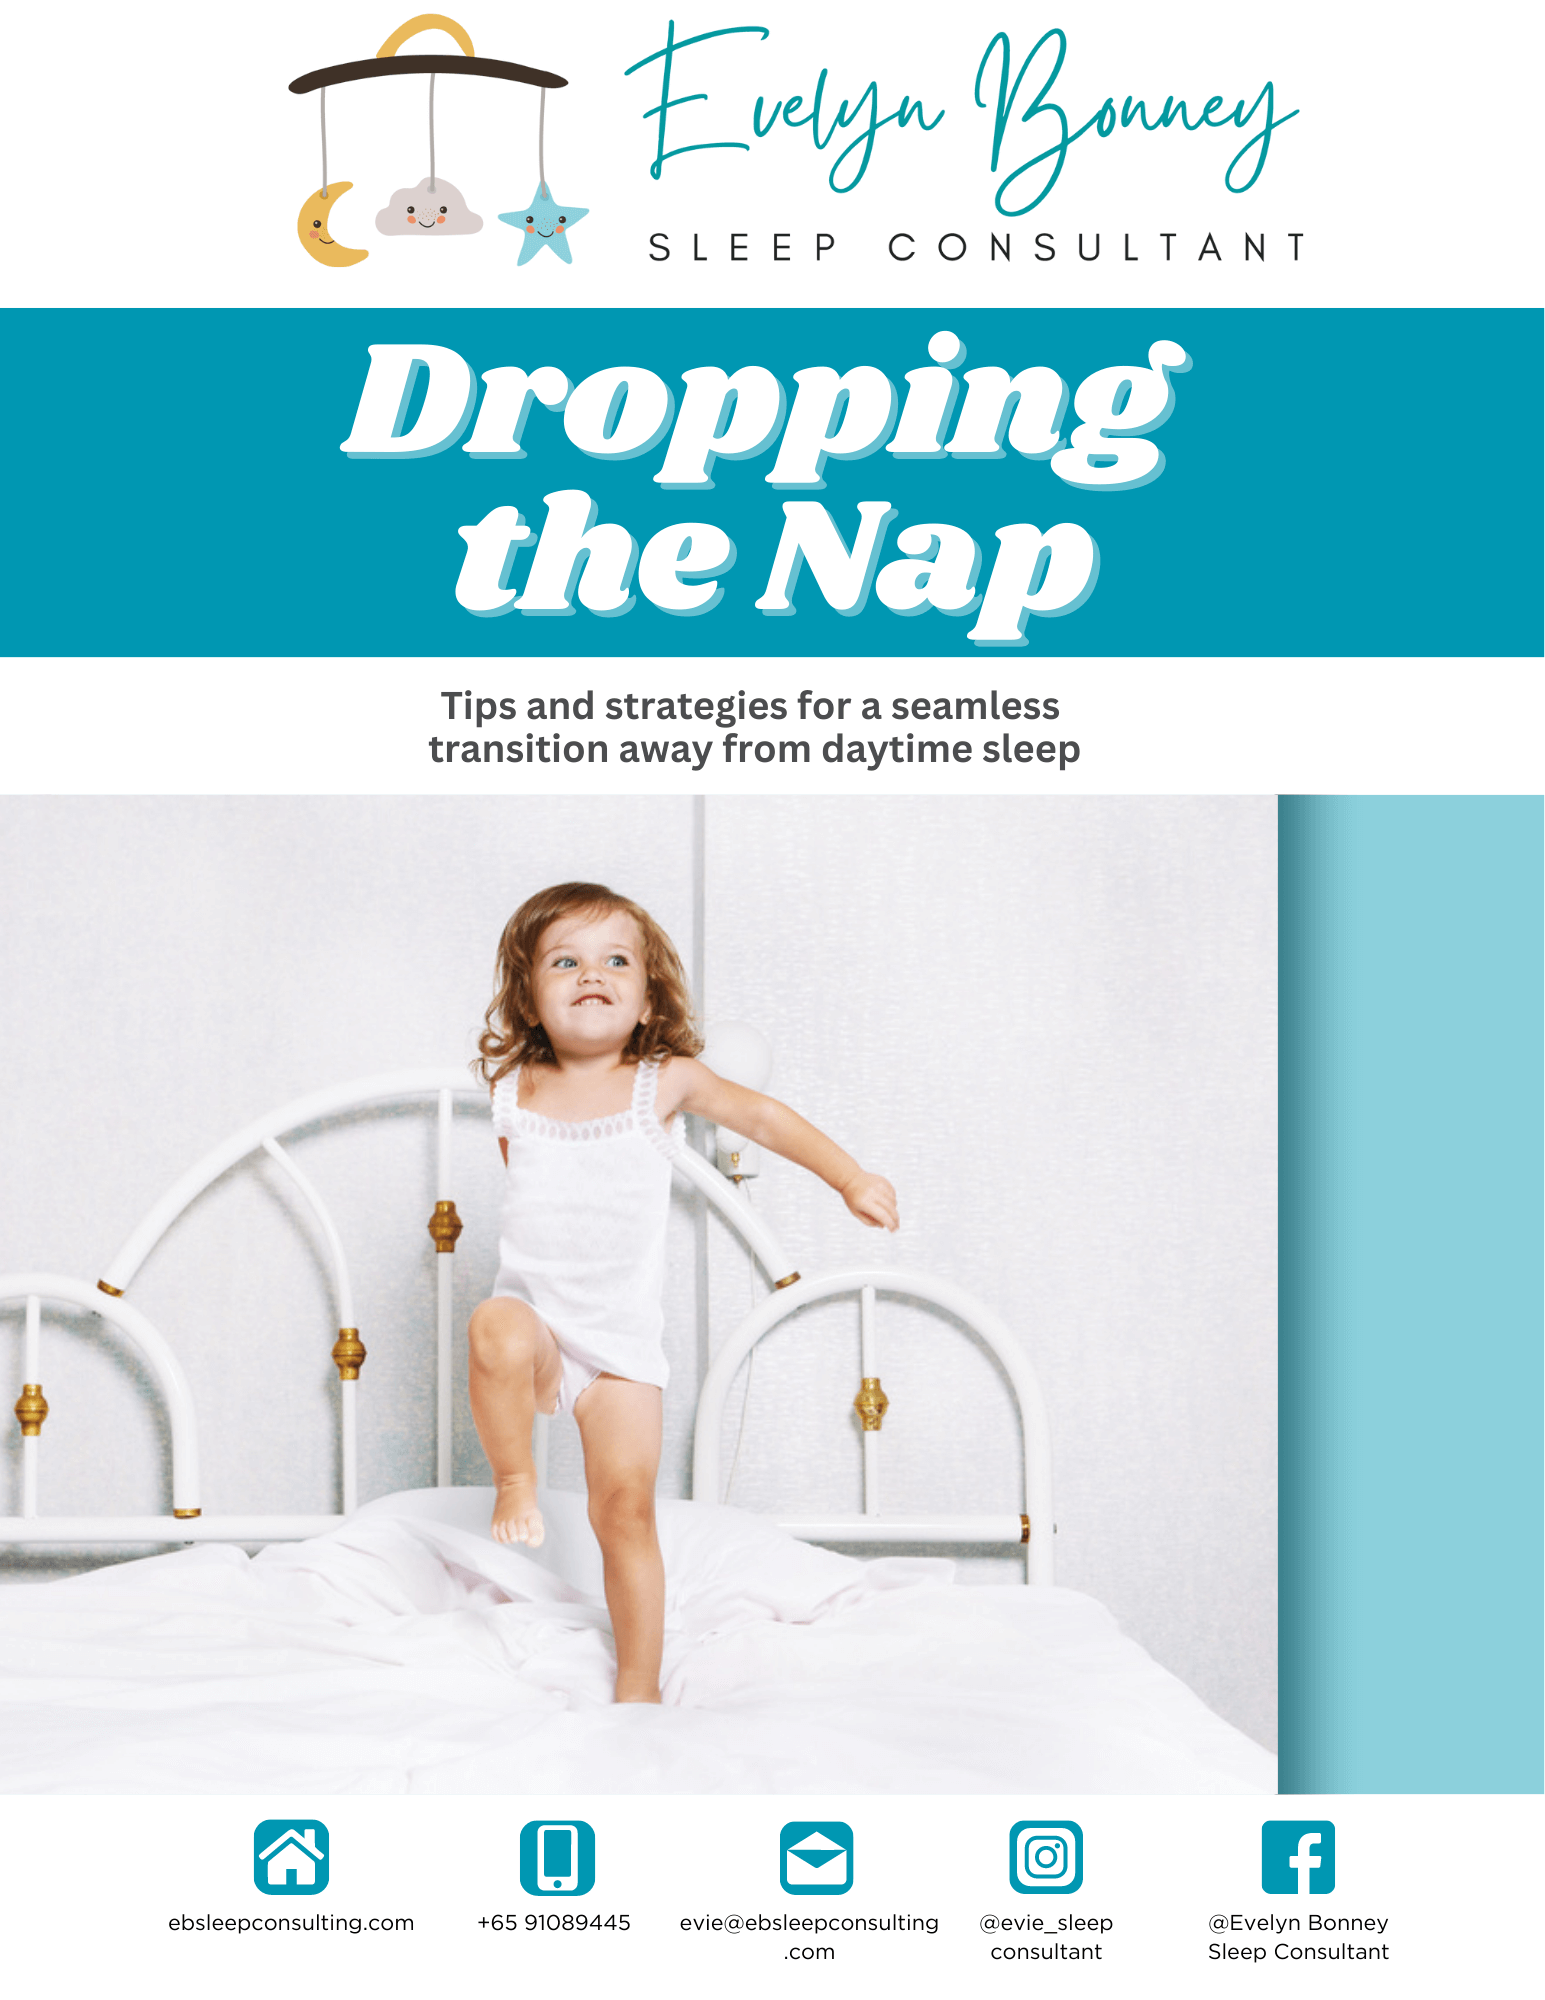 Dropping the nap